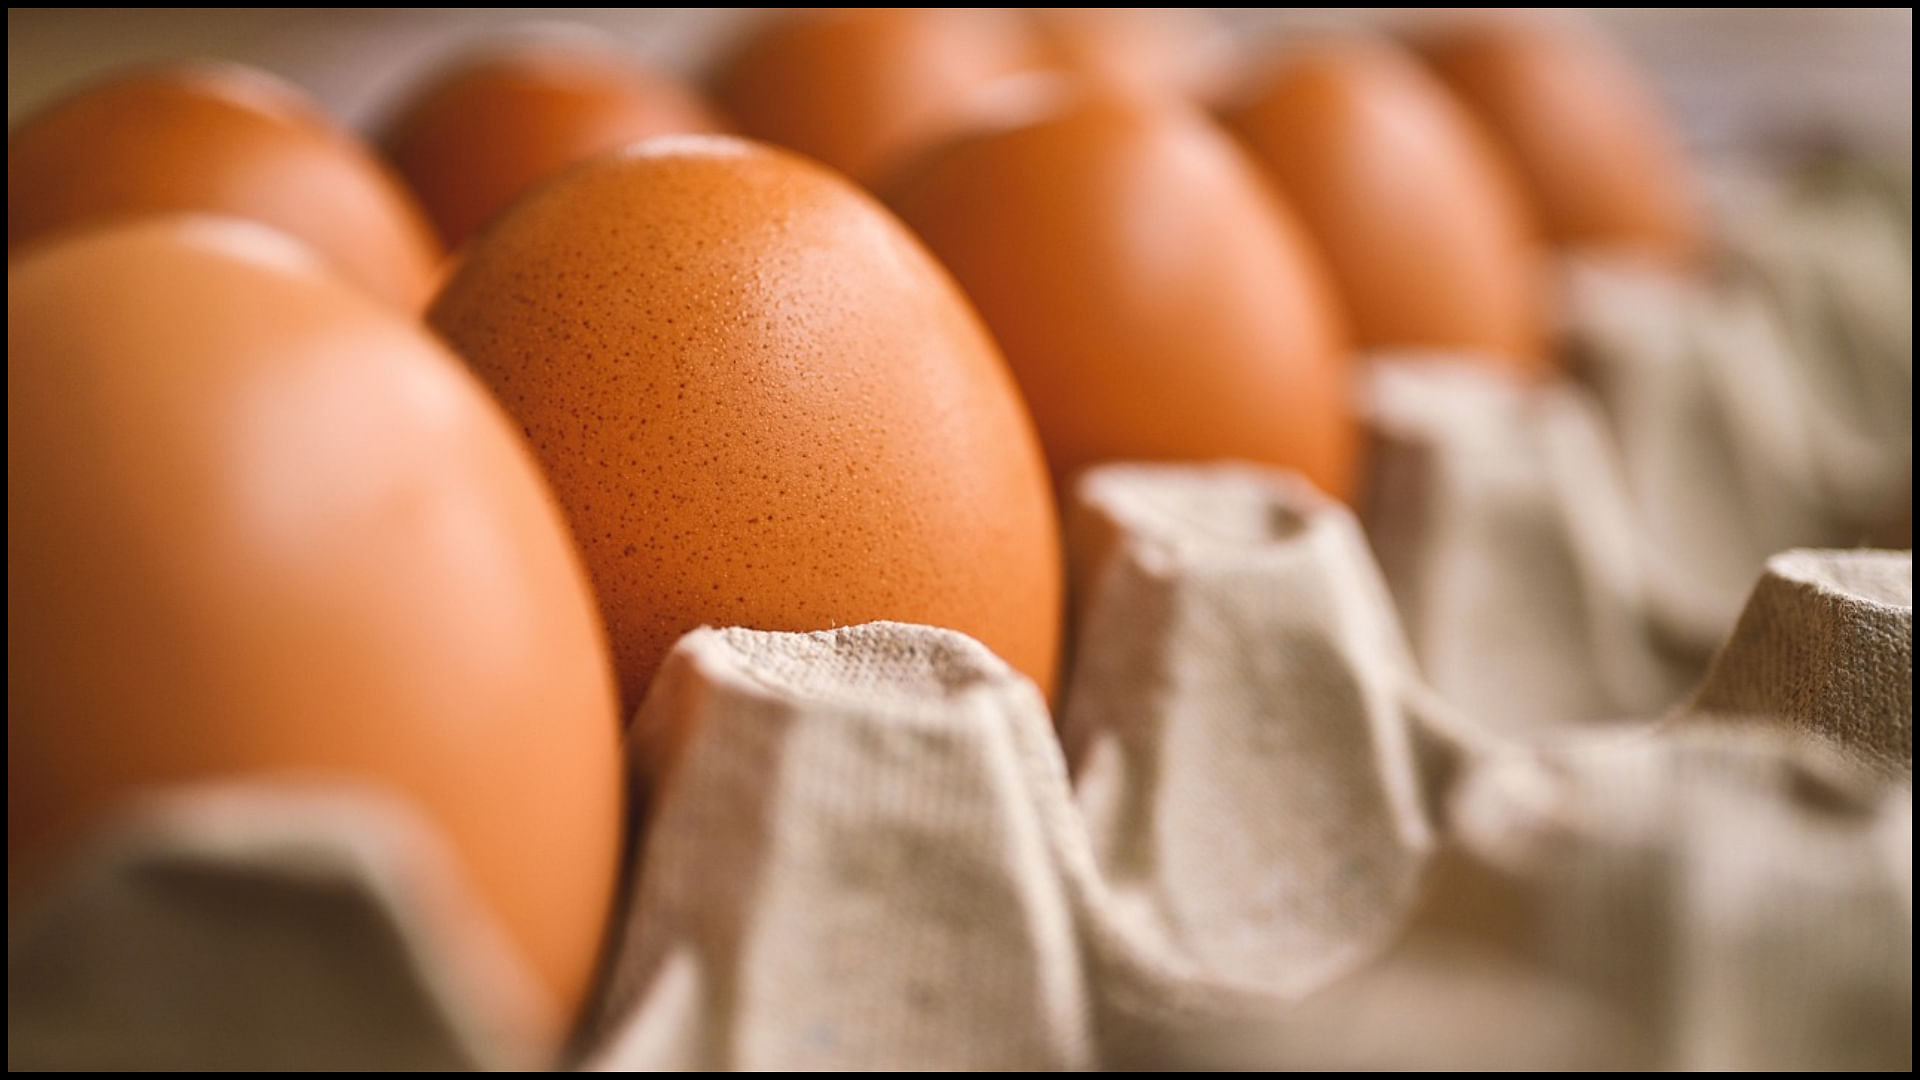 Egg fraud case bengaluru woman tried to buy 4 dozen eggs at rs 49 only to get scammed for a whopping rs 48000